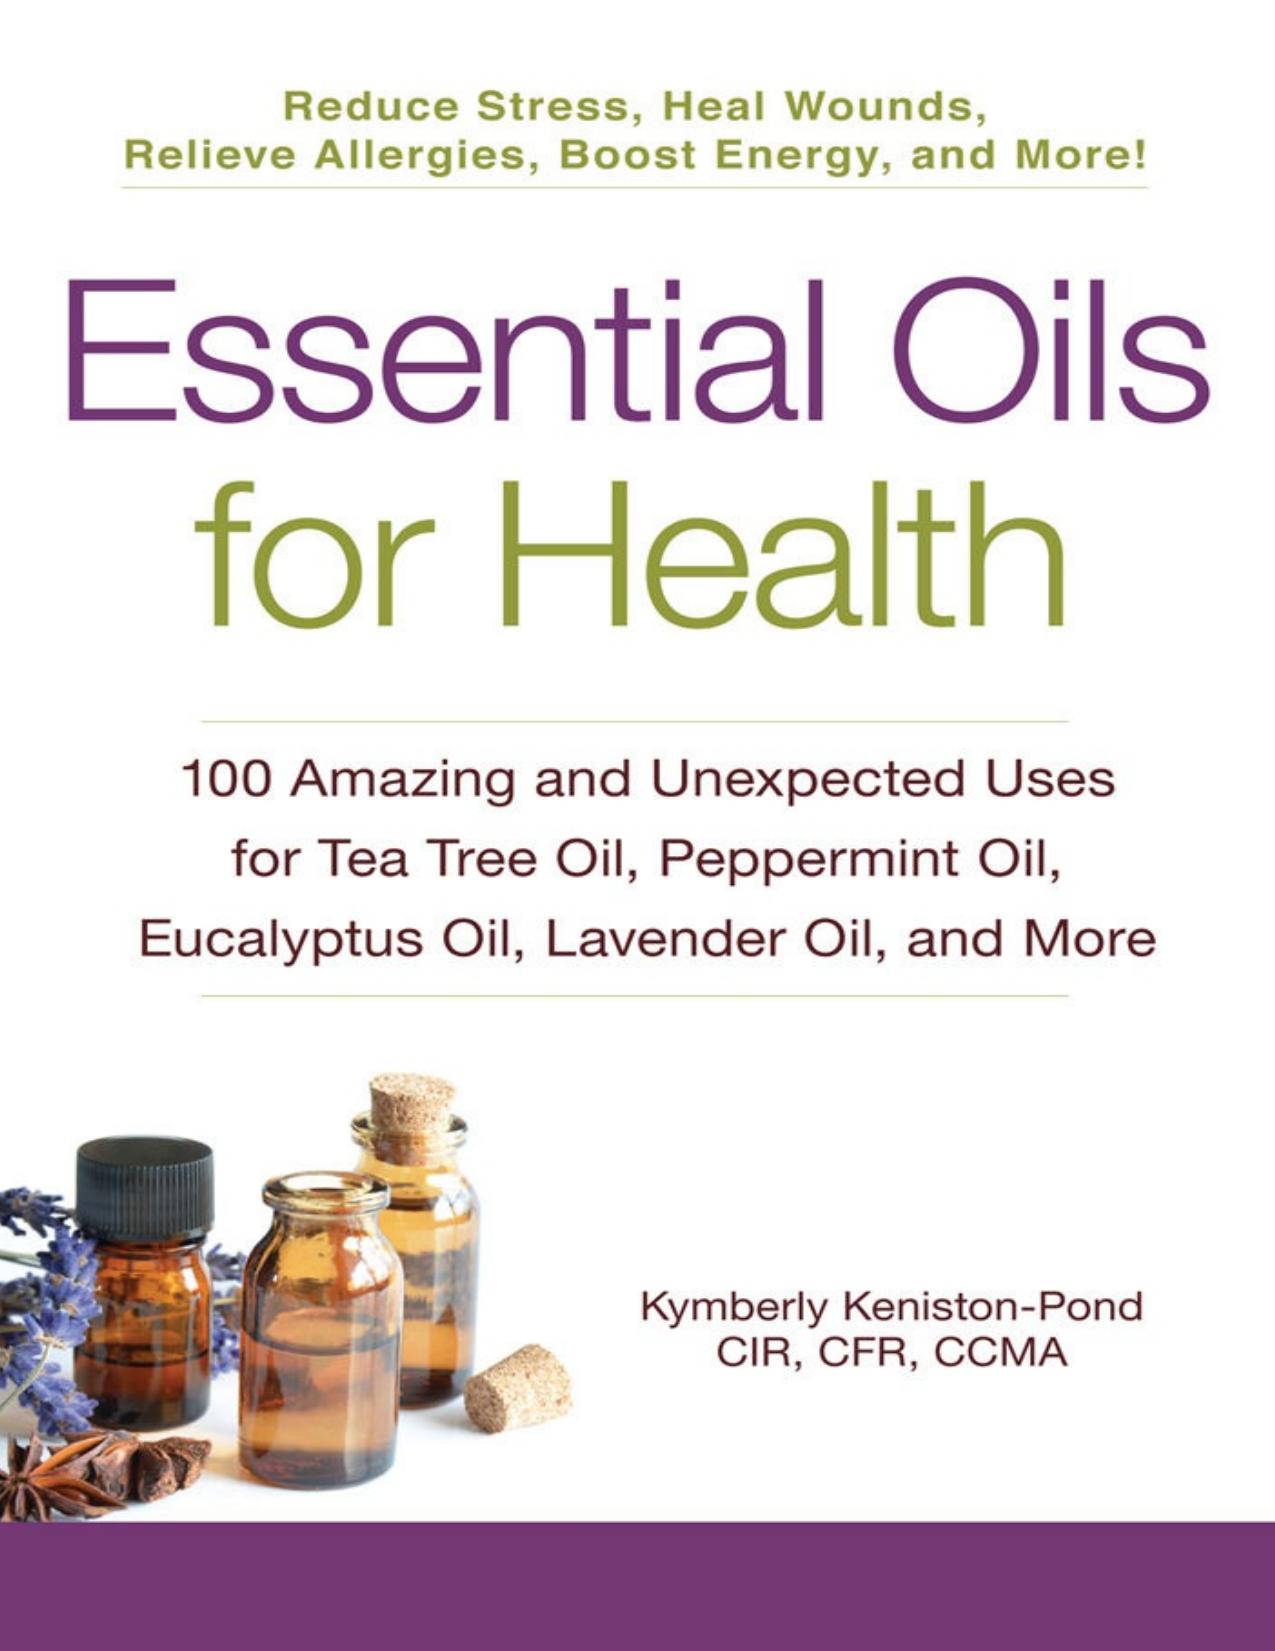 Essential Oils for Health: 100 Amazing and Unexpected Uses for Tea Tree Oil, Peppermint Oil, Eucalyptus Oil, Lavender Oil, and More by Kymberly Keniston-Pond